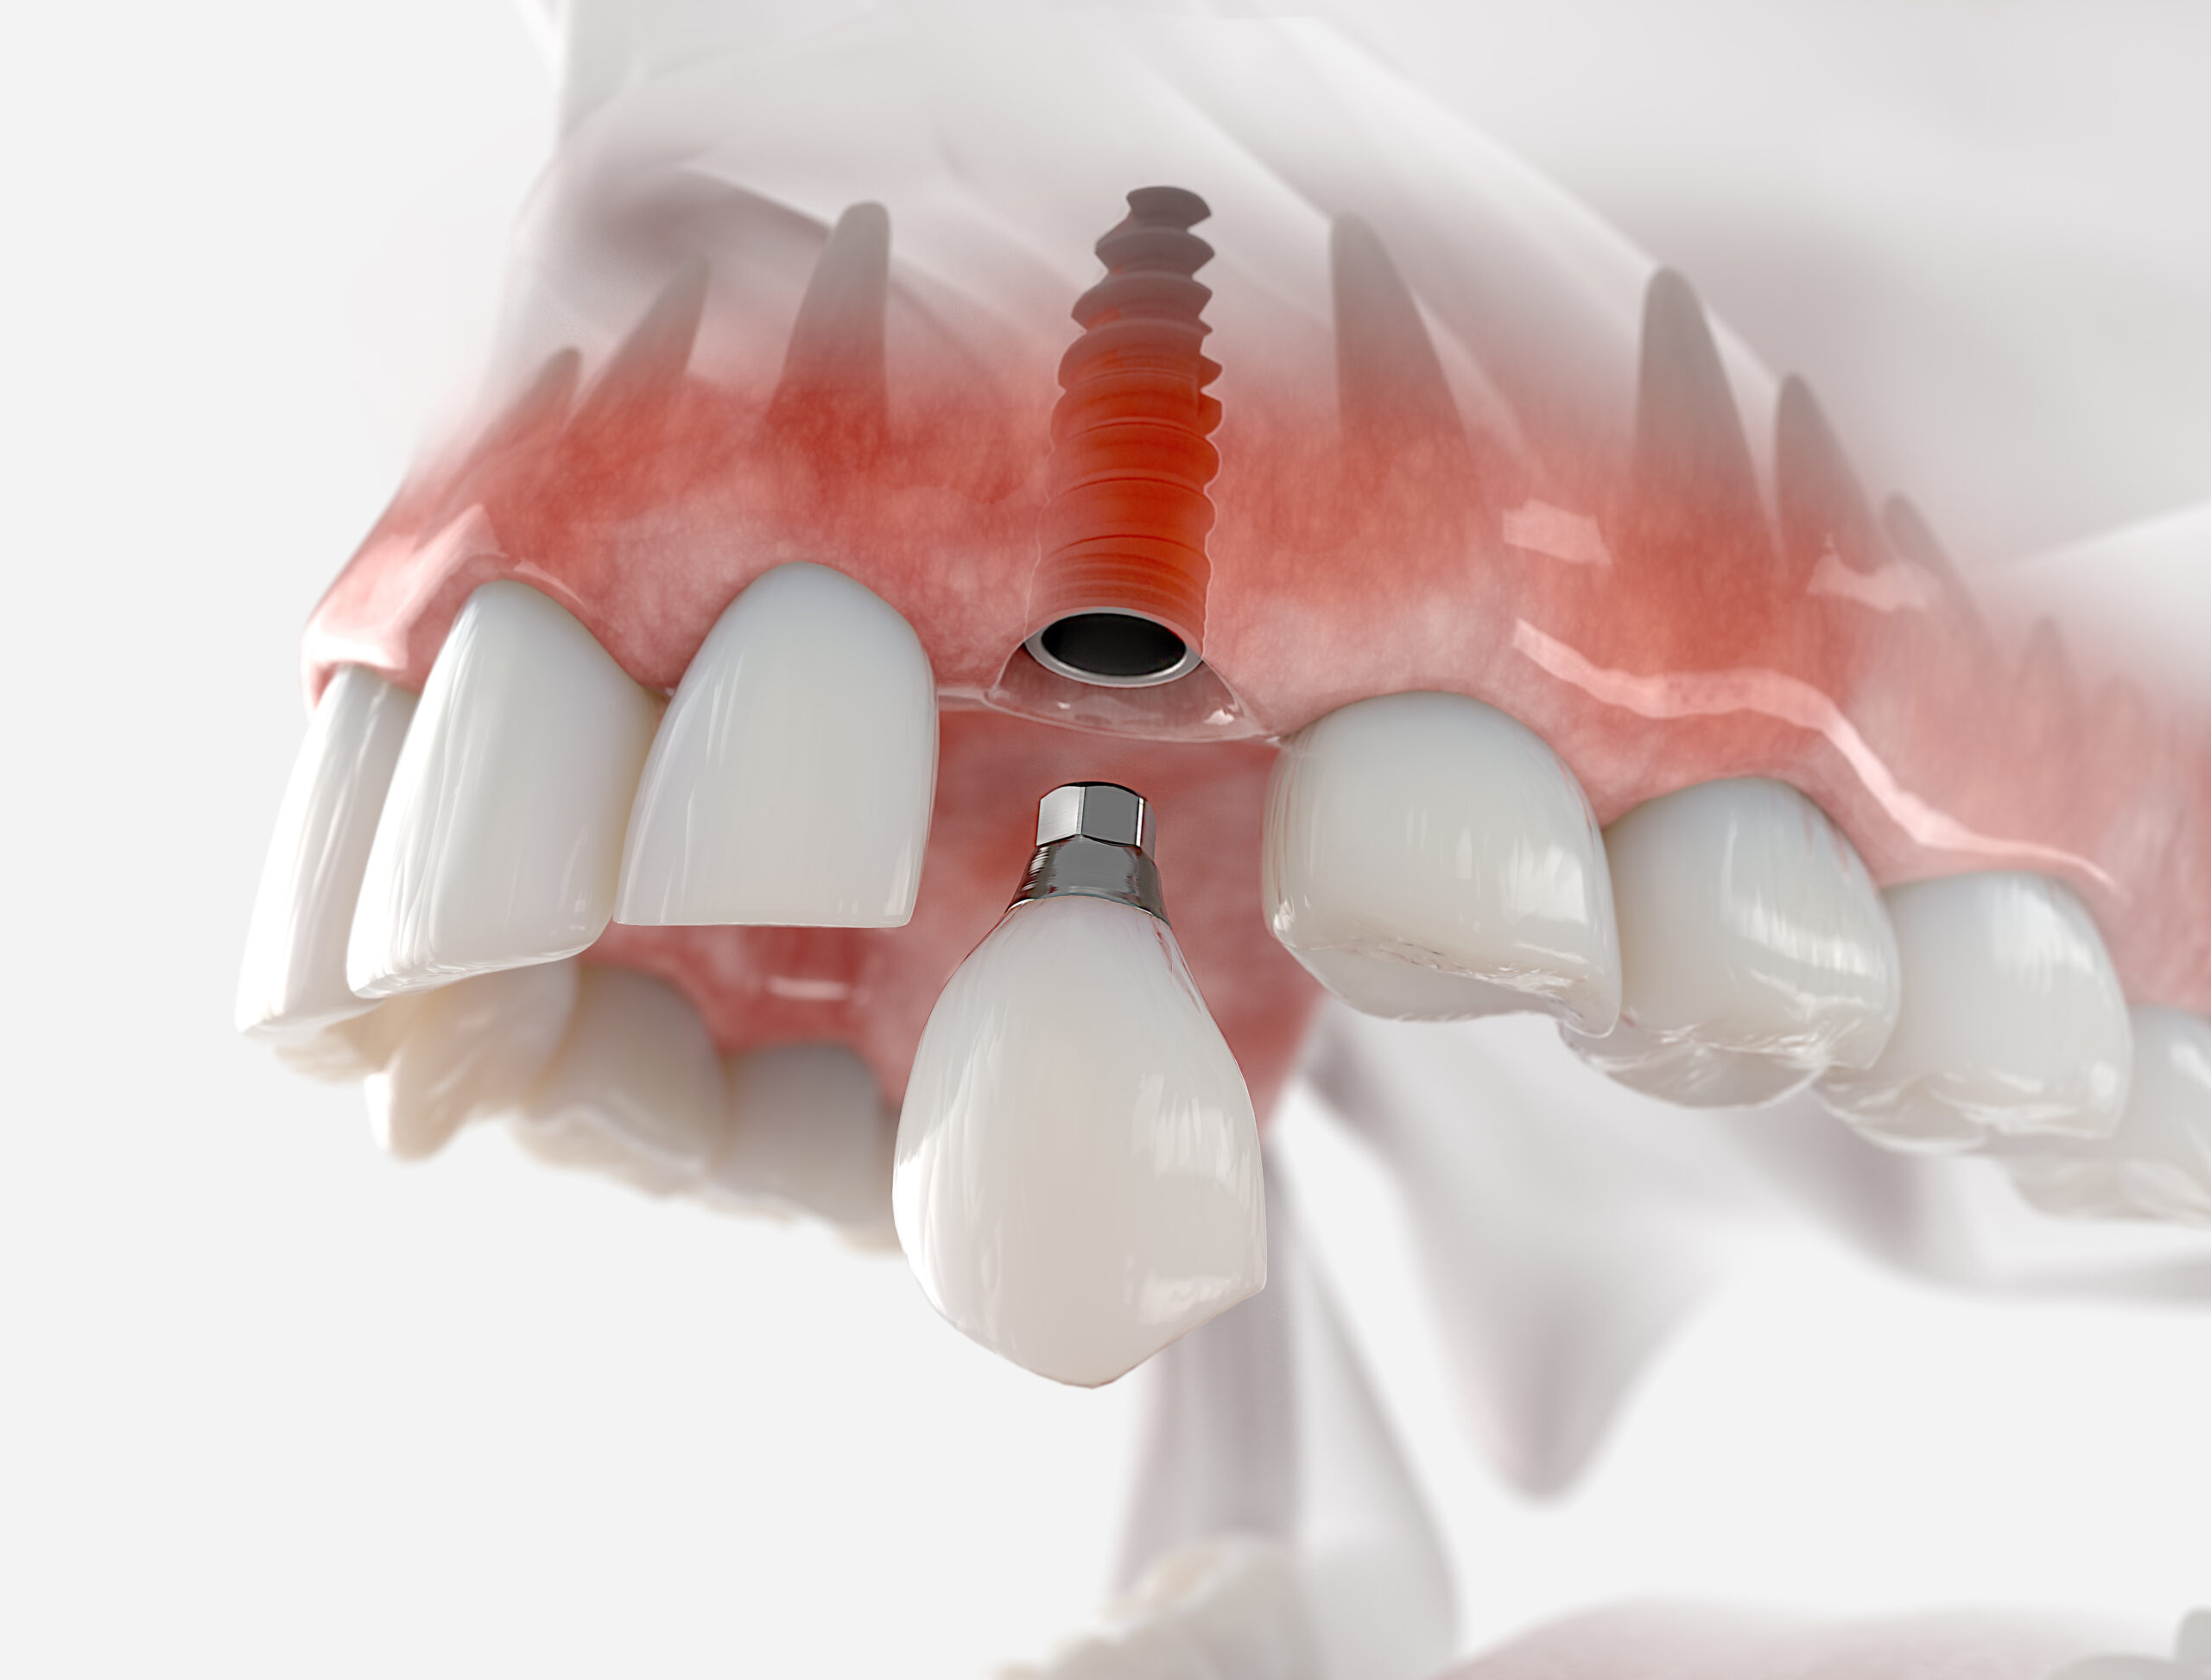 an image of tooth implants.